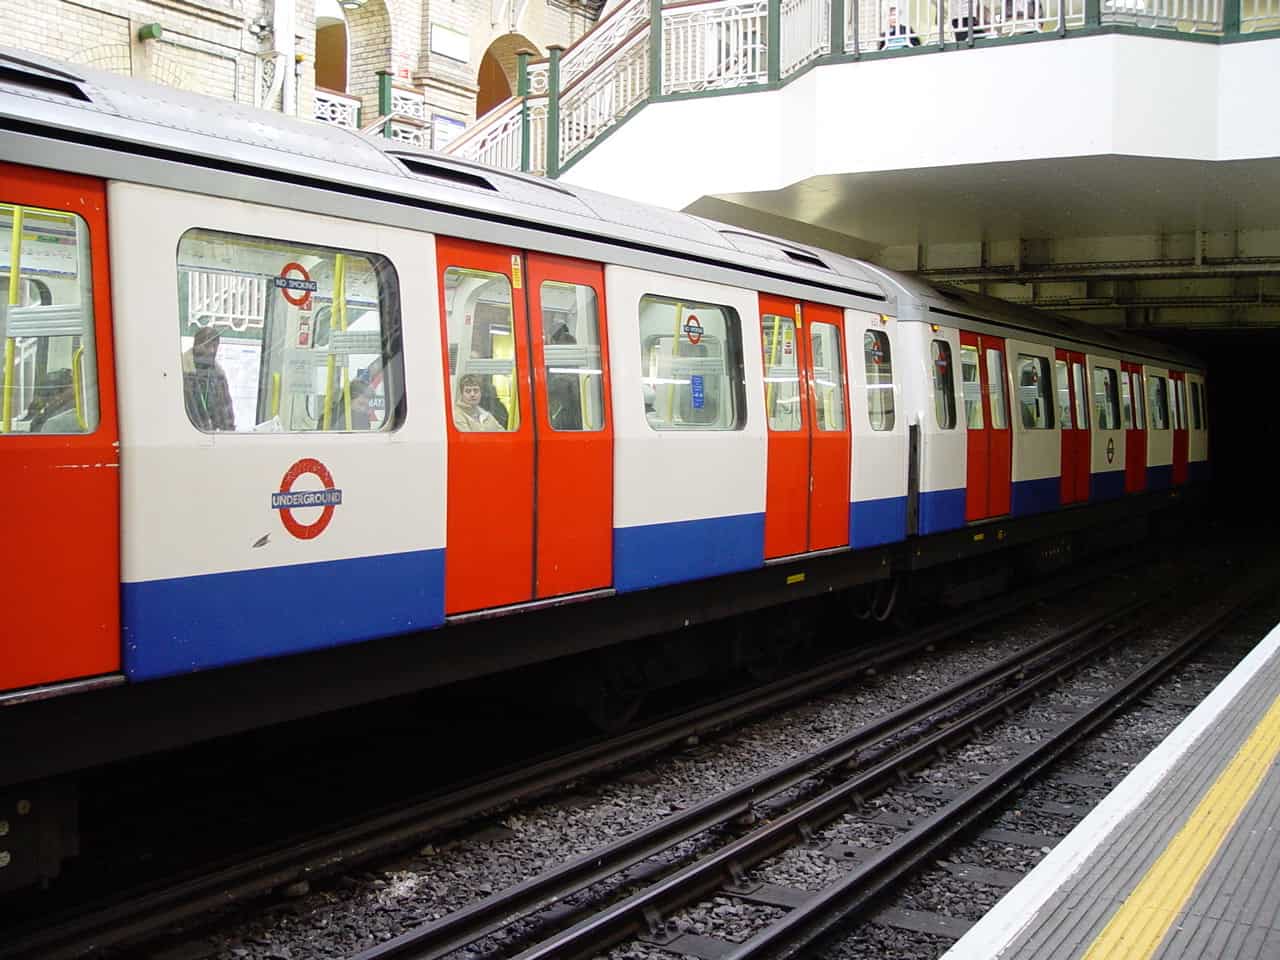 Bayswater Tube Station in London, England